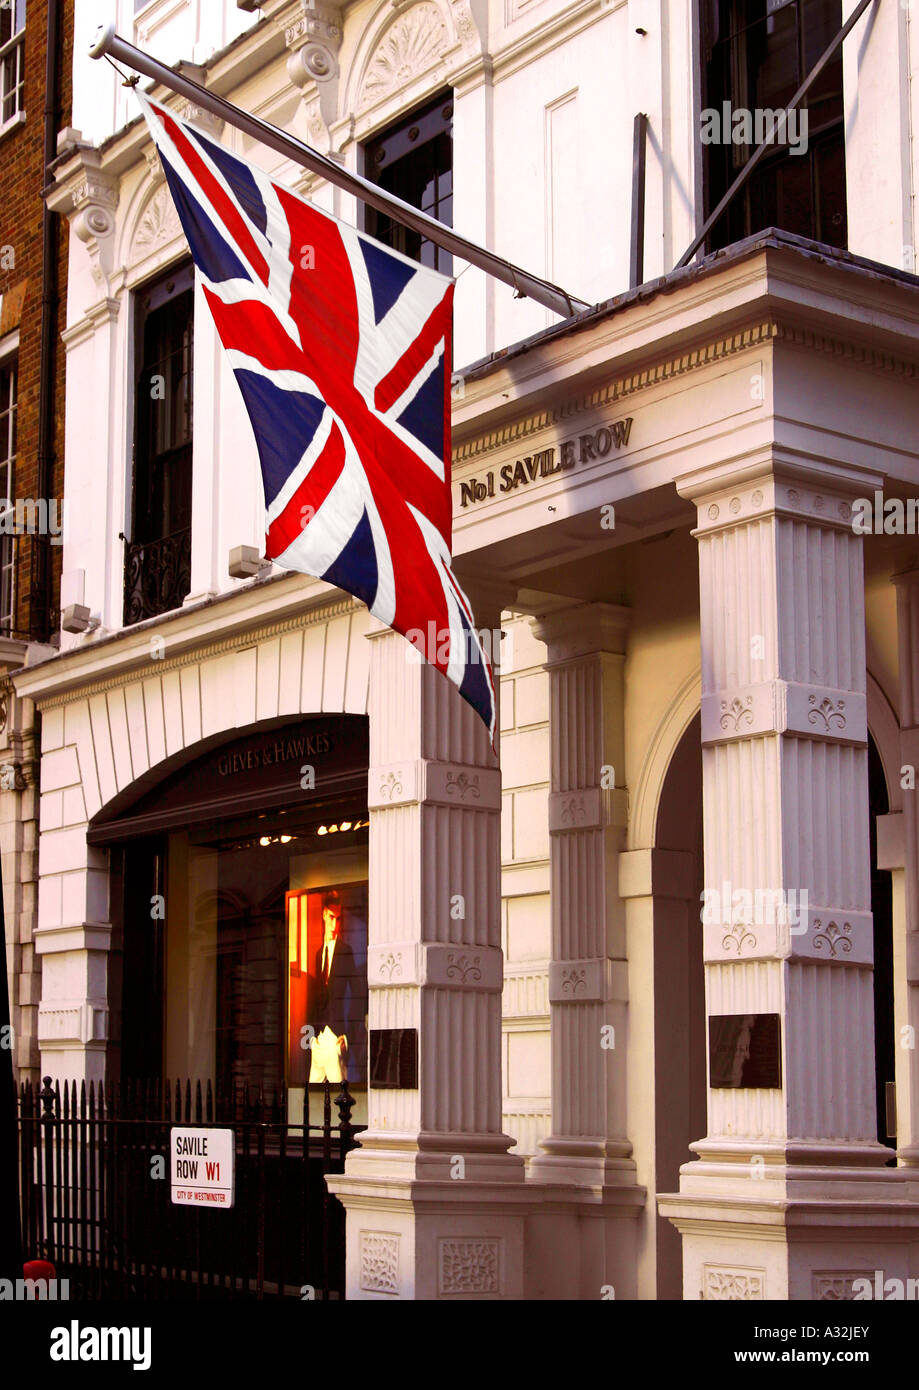 Union jack flying outside tailor's shop in Savile Row, london, england Stock Photo